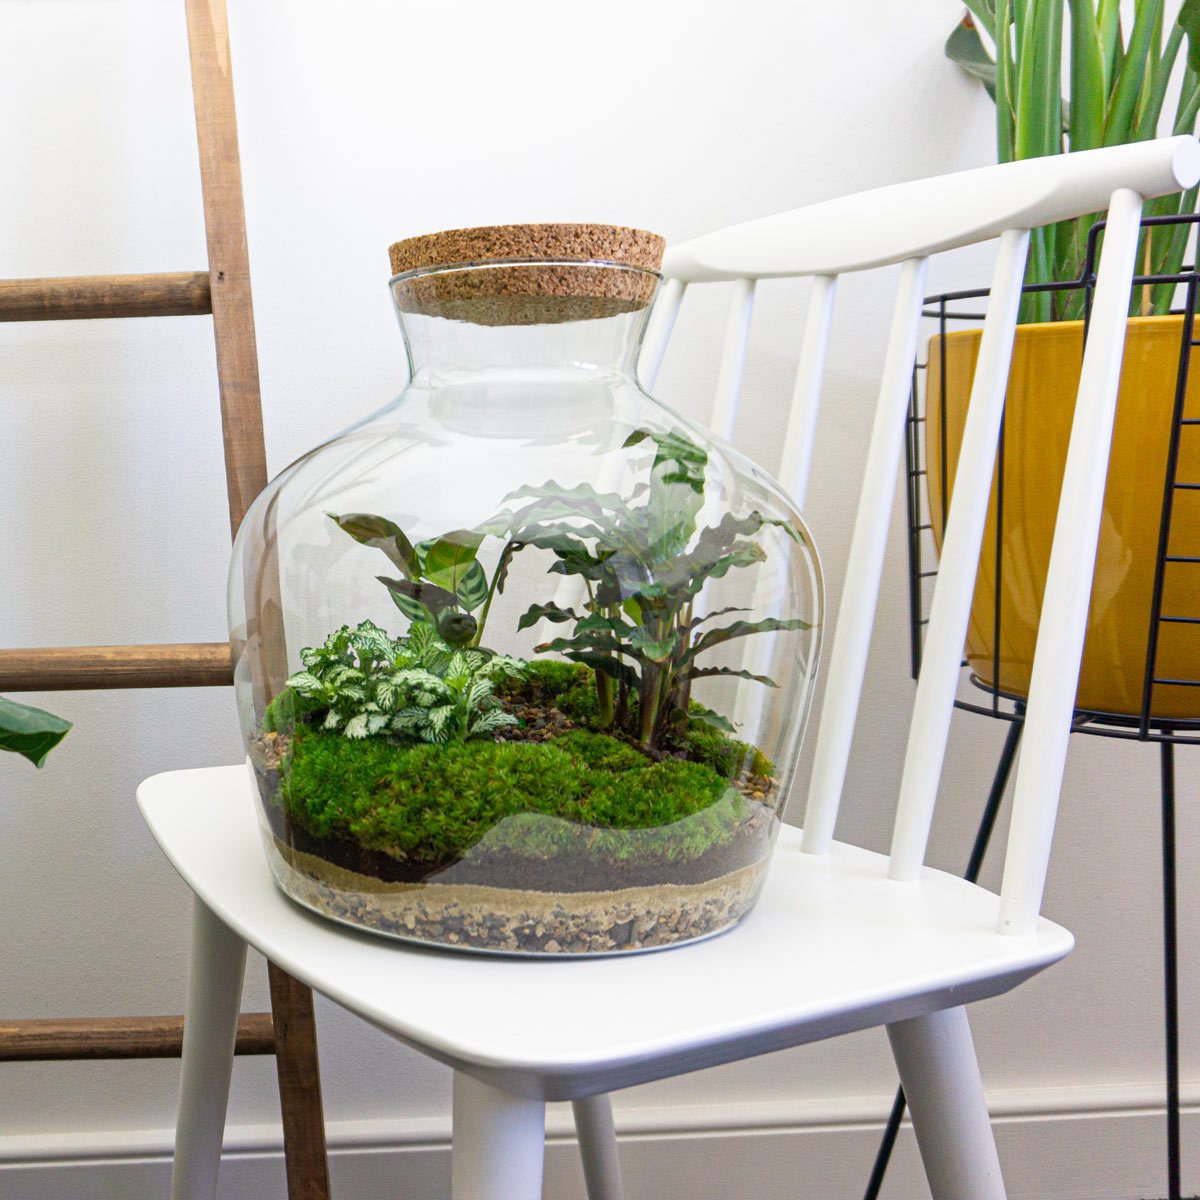 How to Build A Terrarium, Display Your Plants